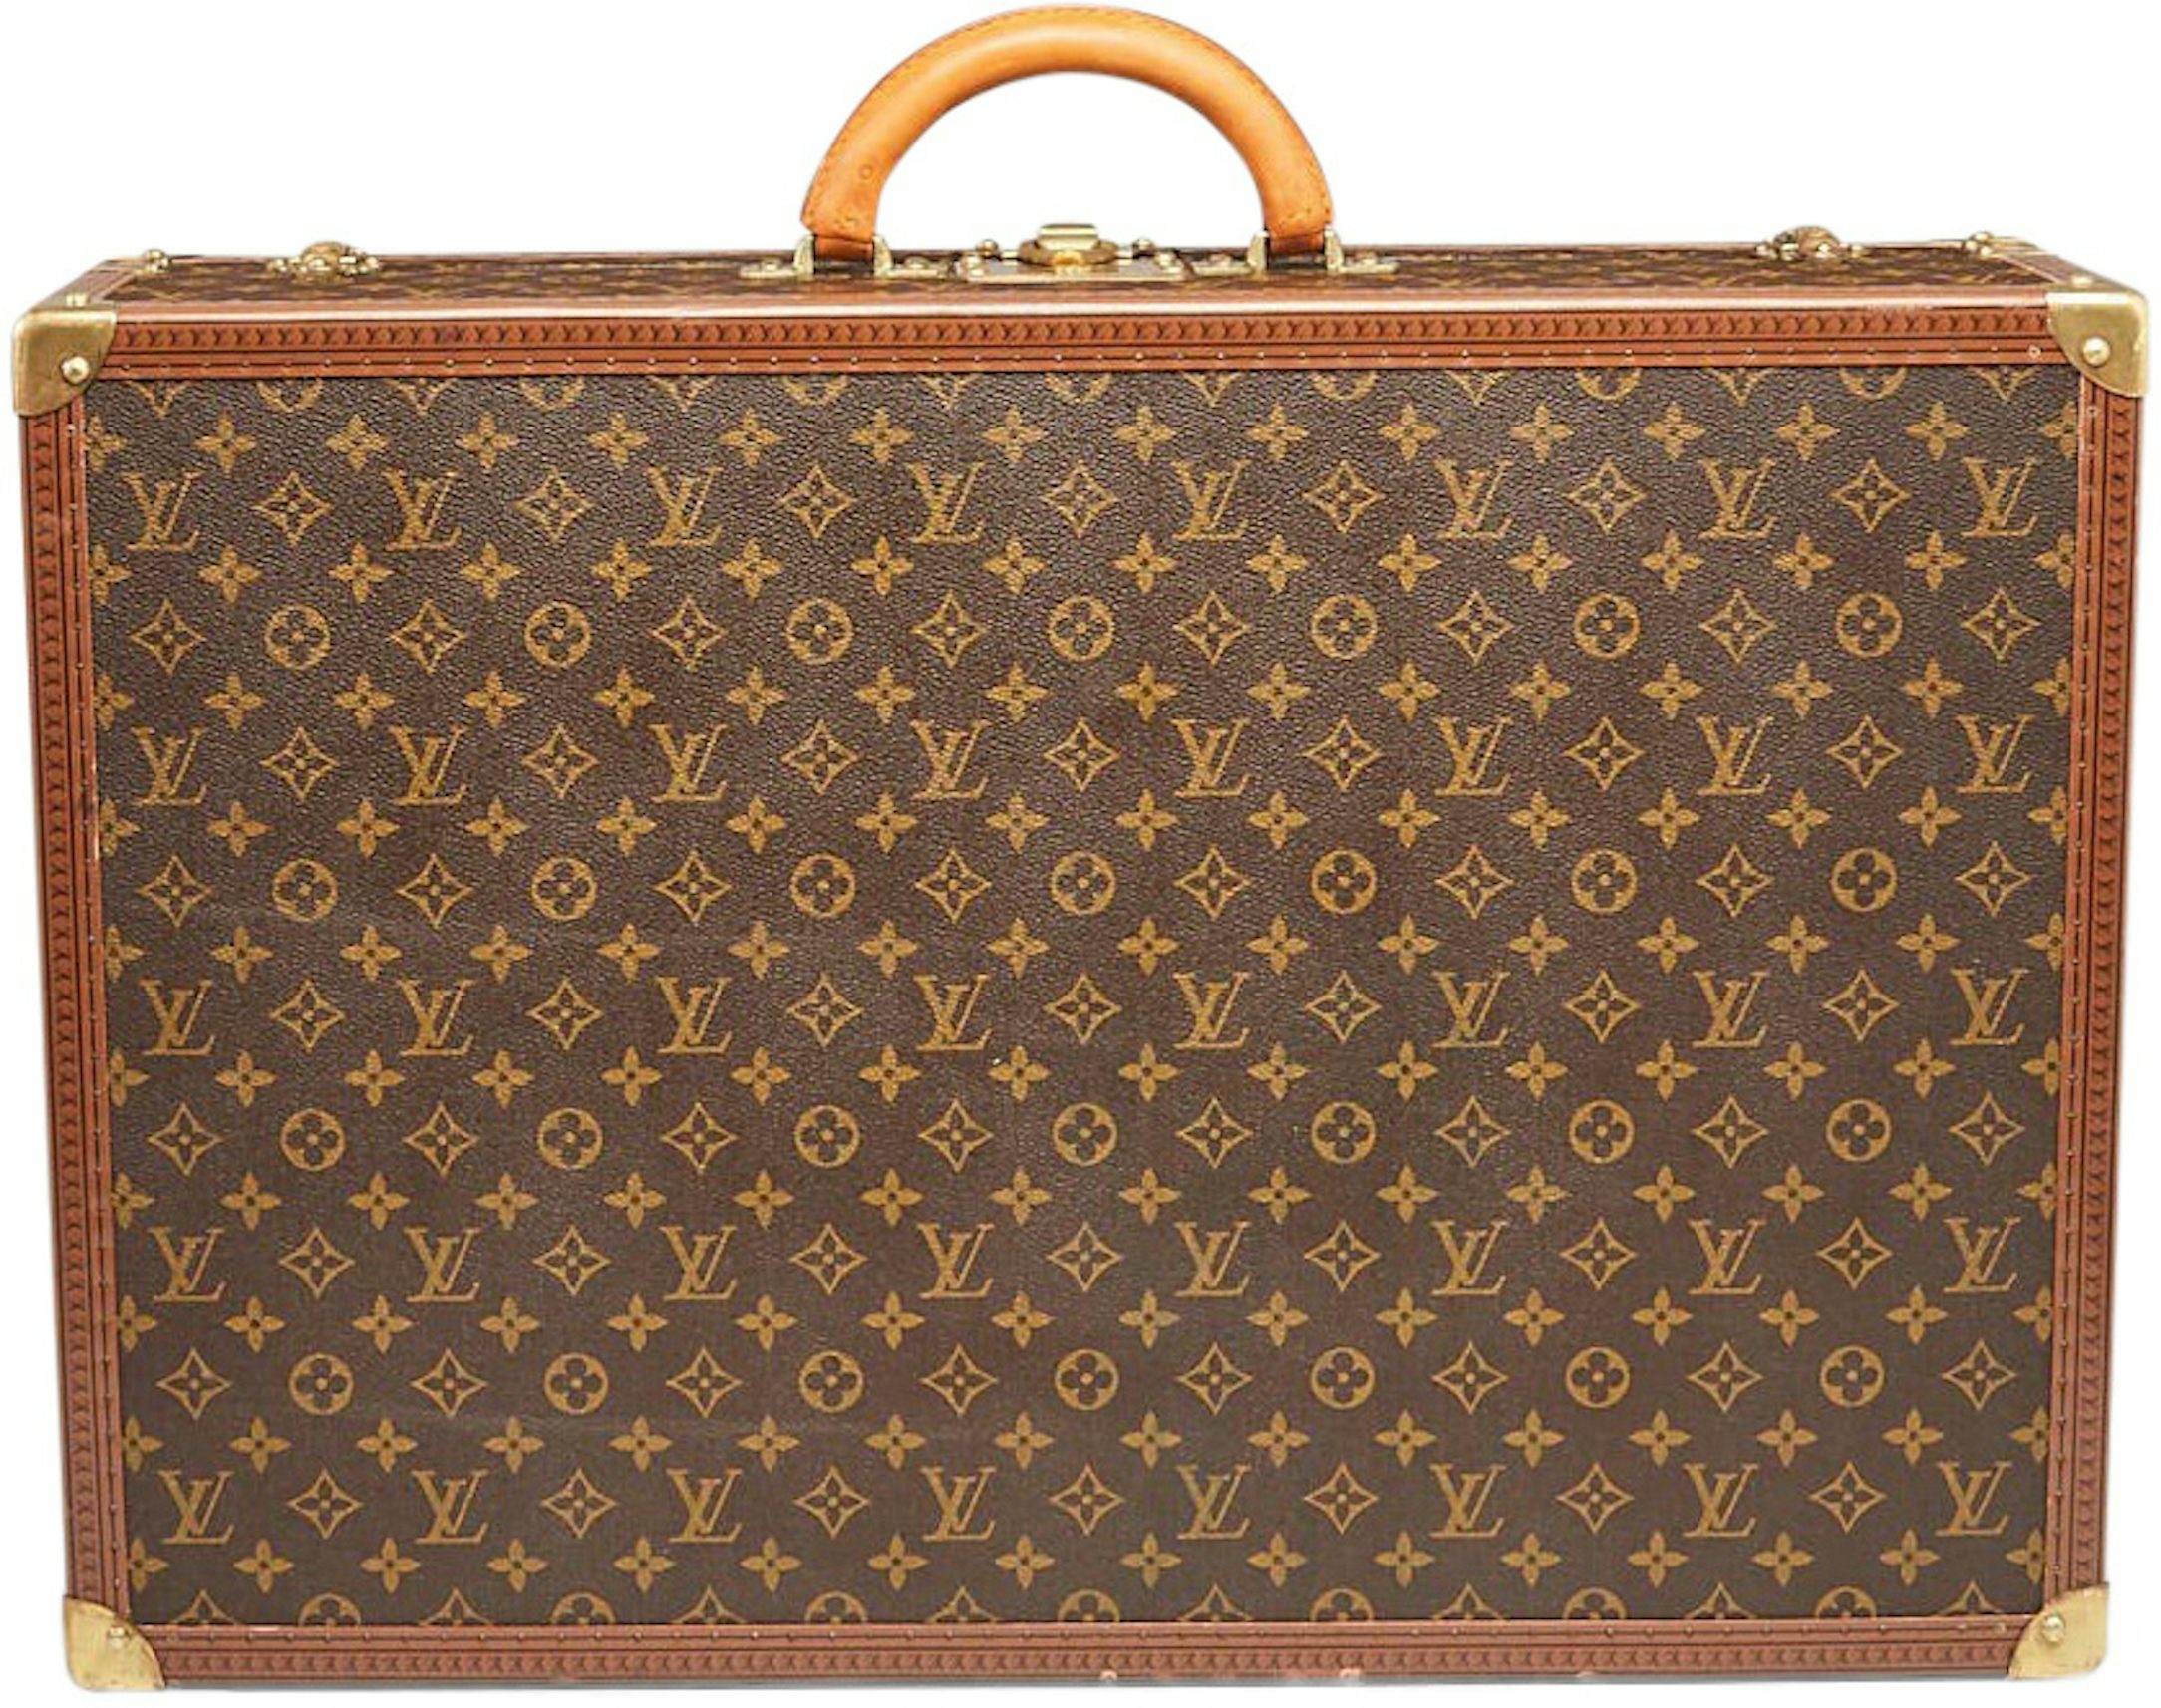 Vintage Louis Vuitton Hard-Sided Luggage